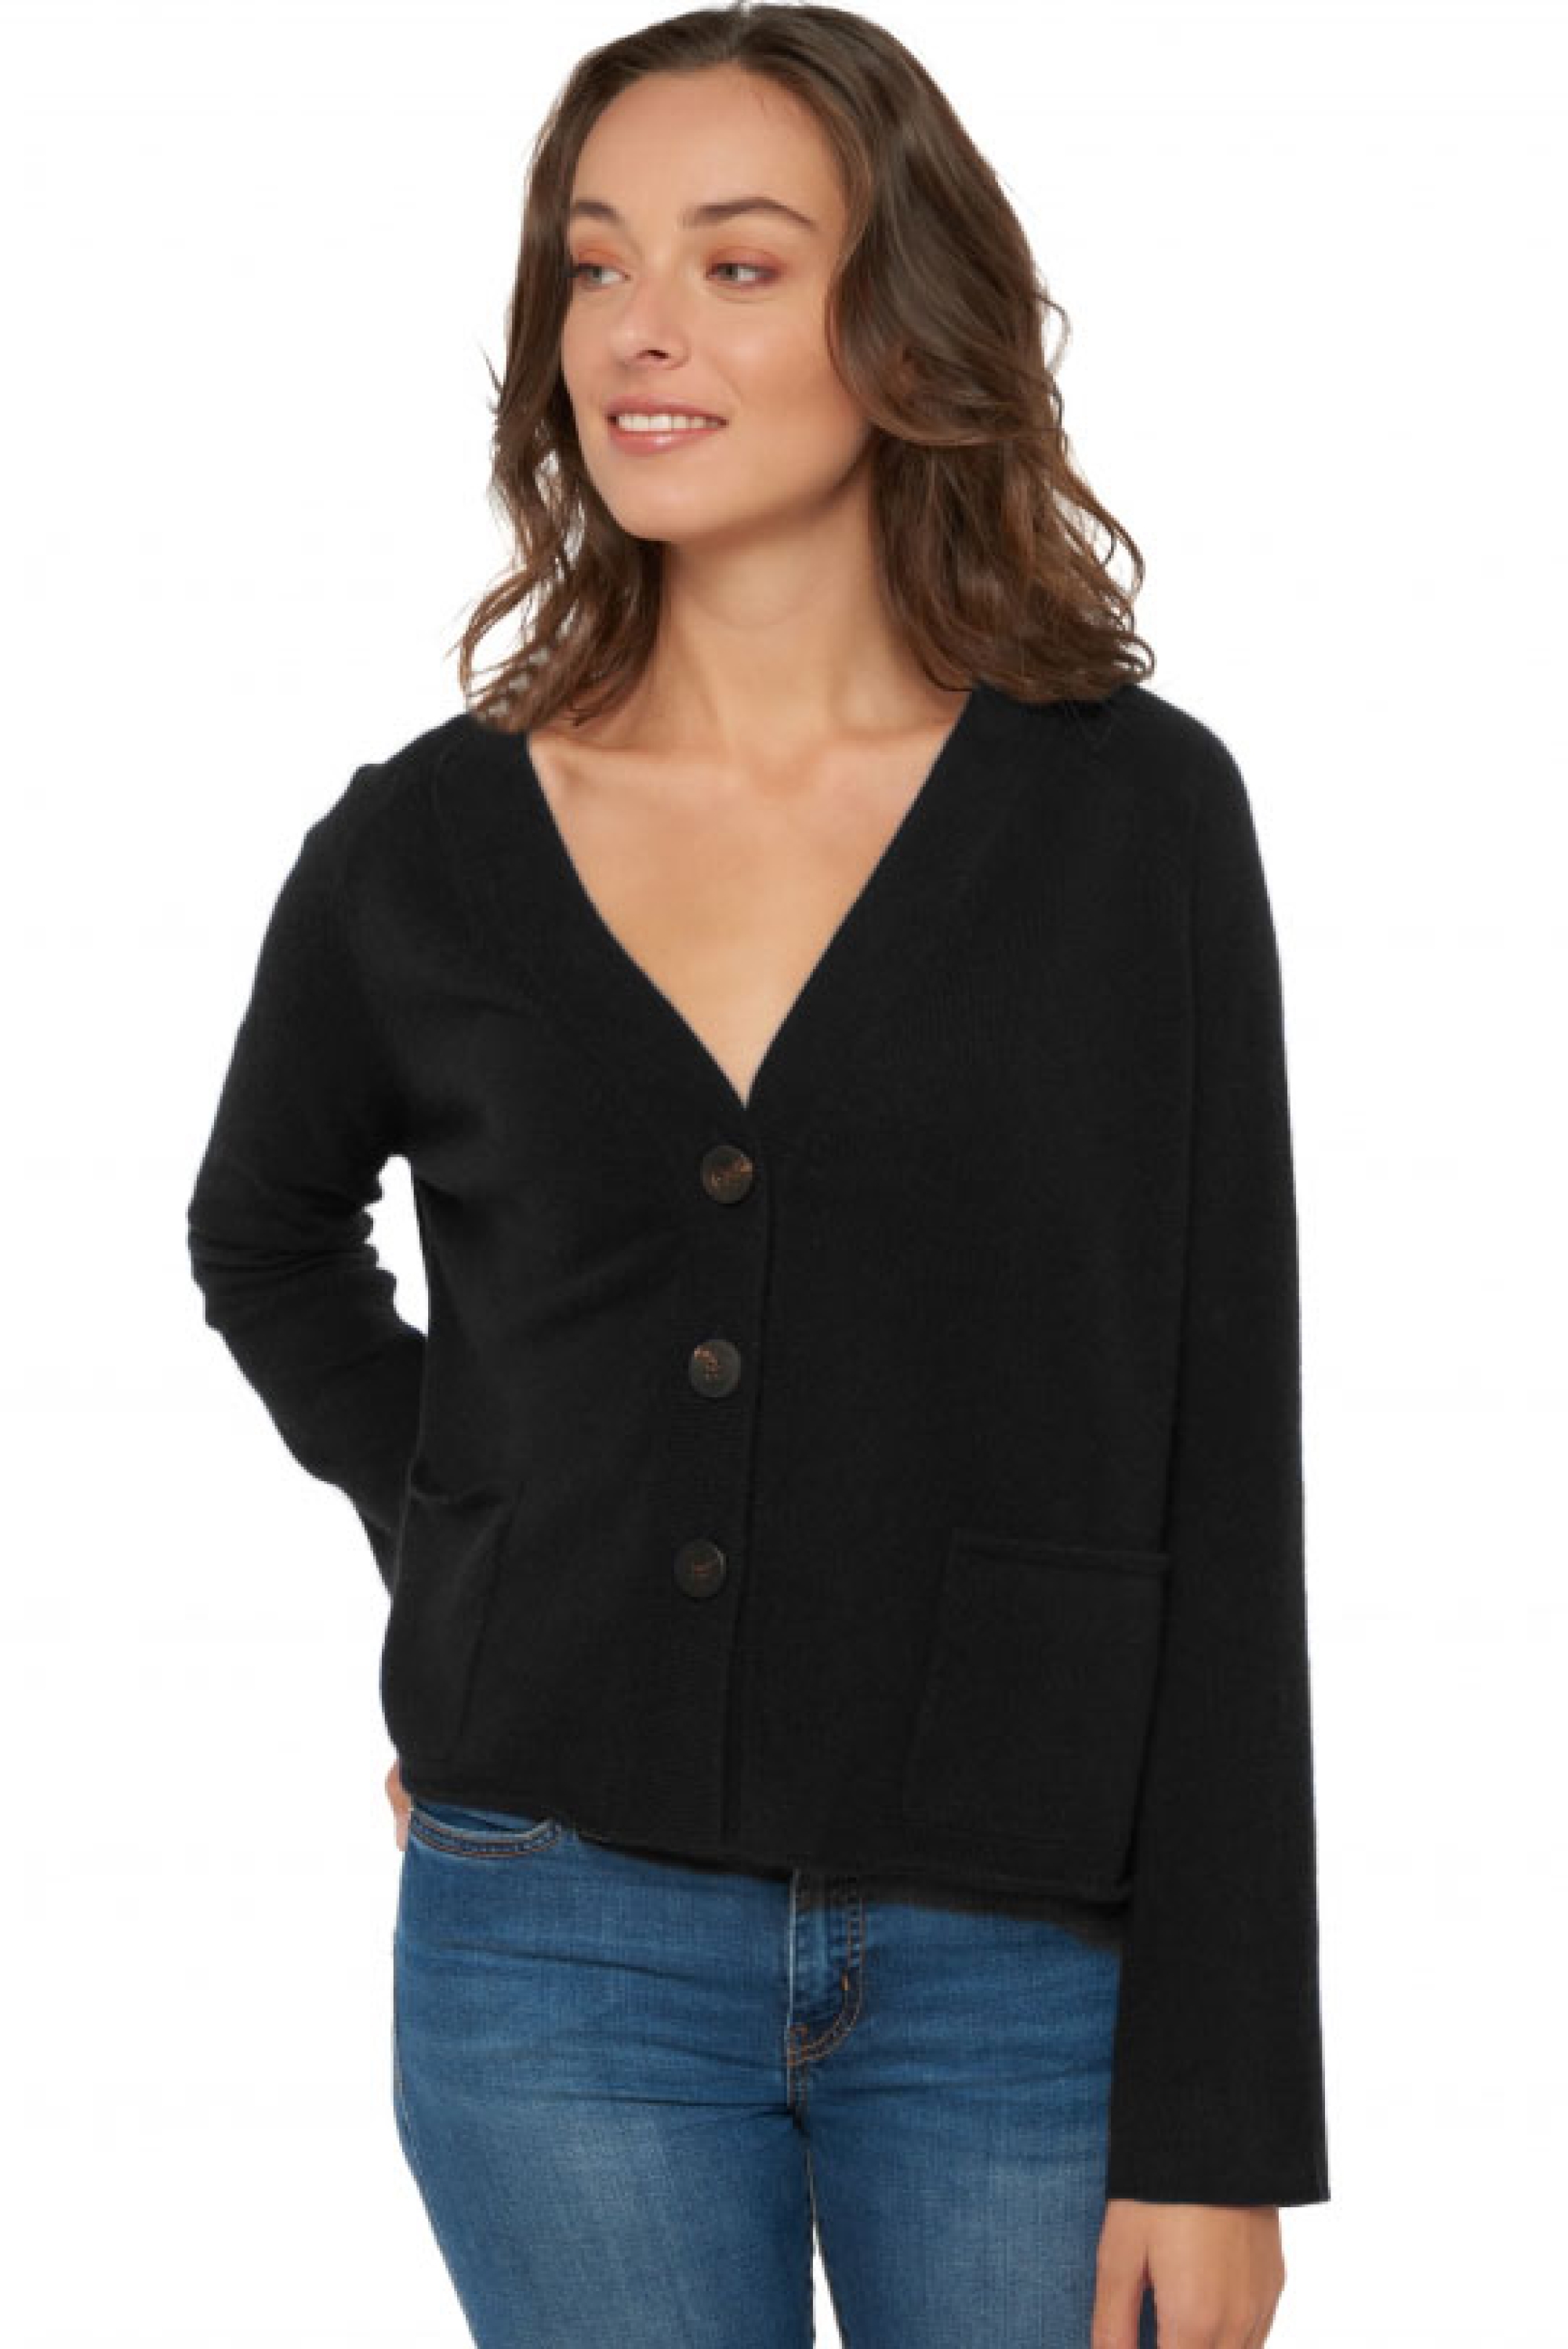 Cashmere ladies our full range of women s sweaters chana black s1